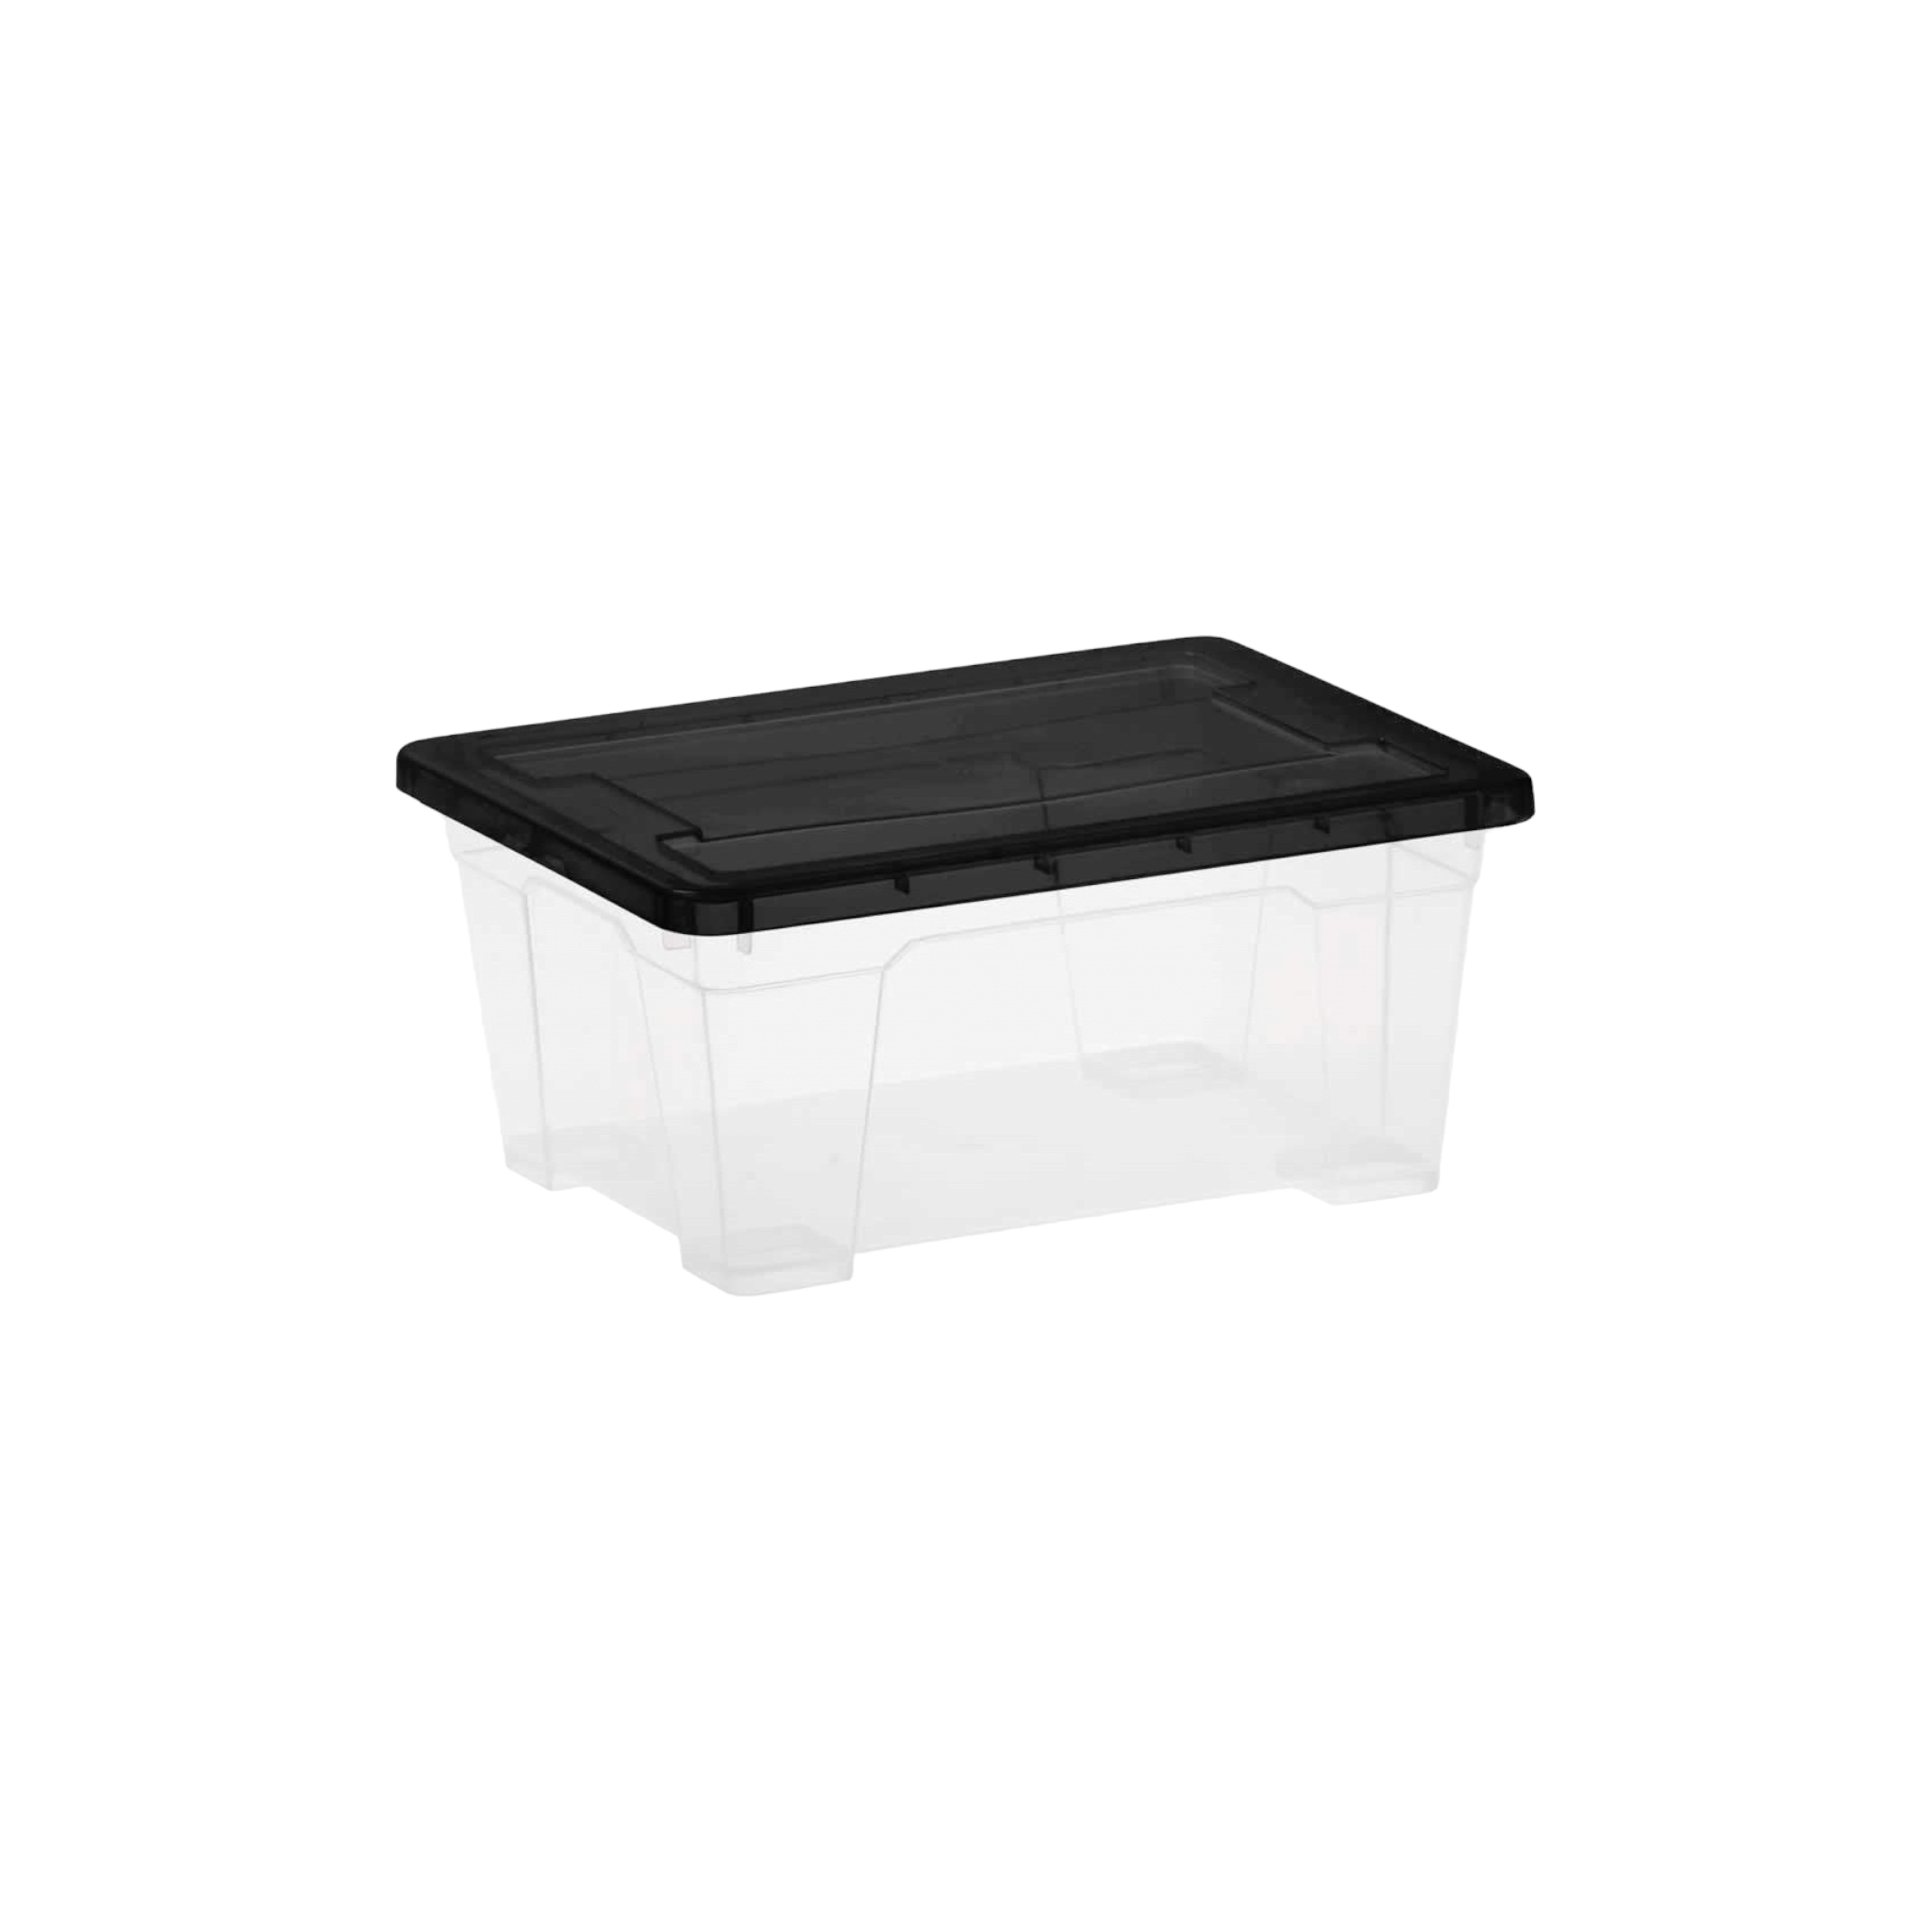 1.5L Plastic Storage Box Utility Container Assorted Buzz